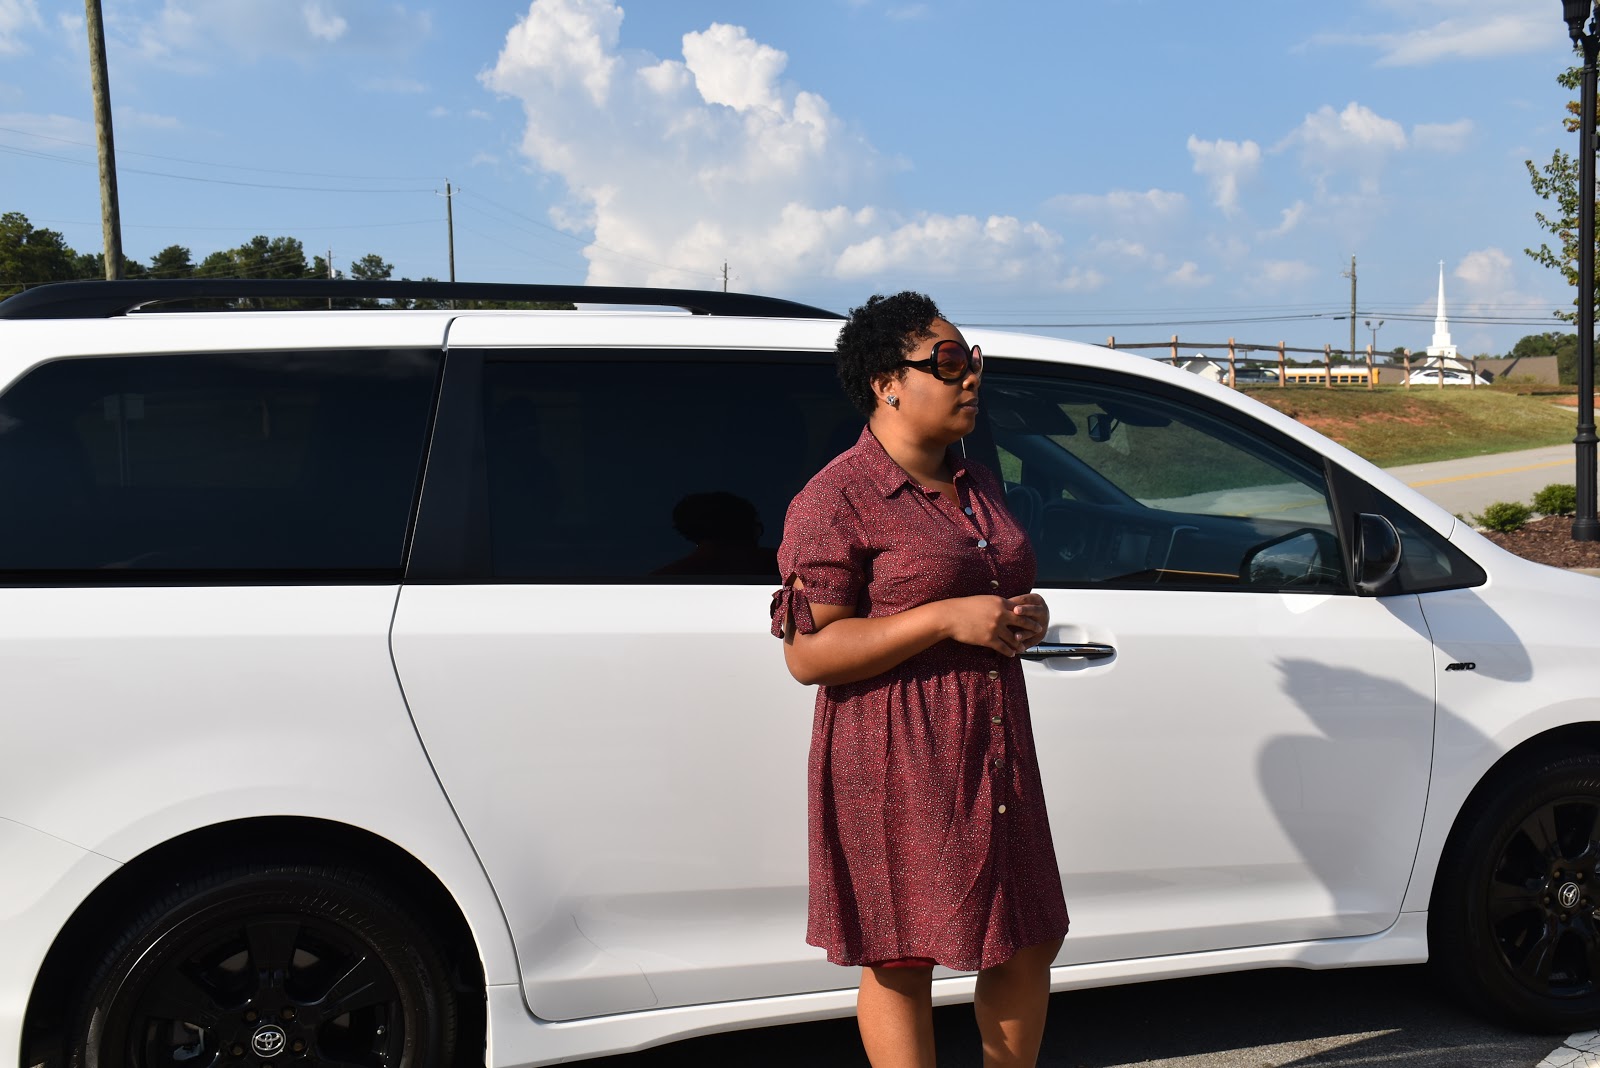 The Sporty Van: Top 6 Things I Loved About the 2020 Toyota Sienna SE